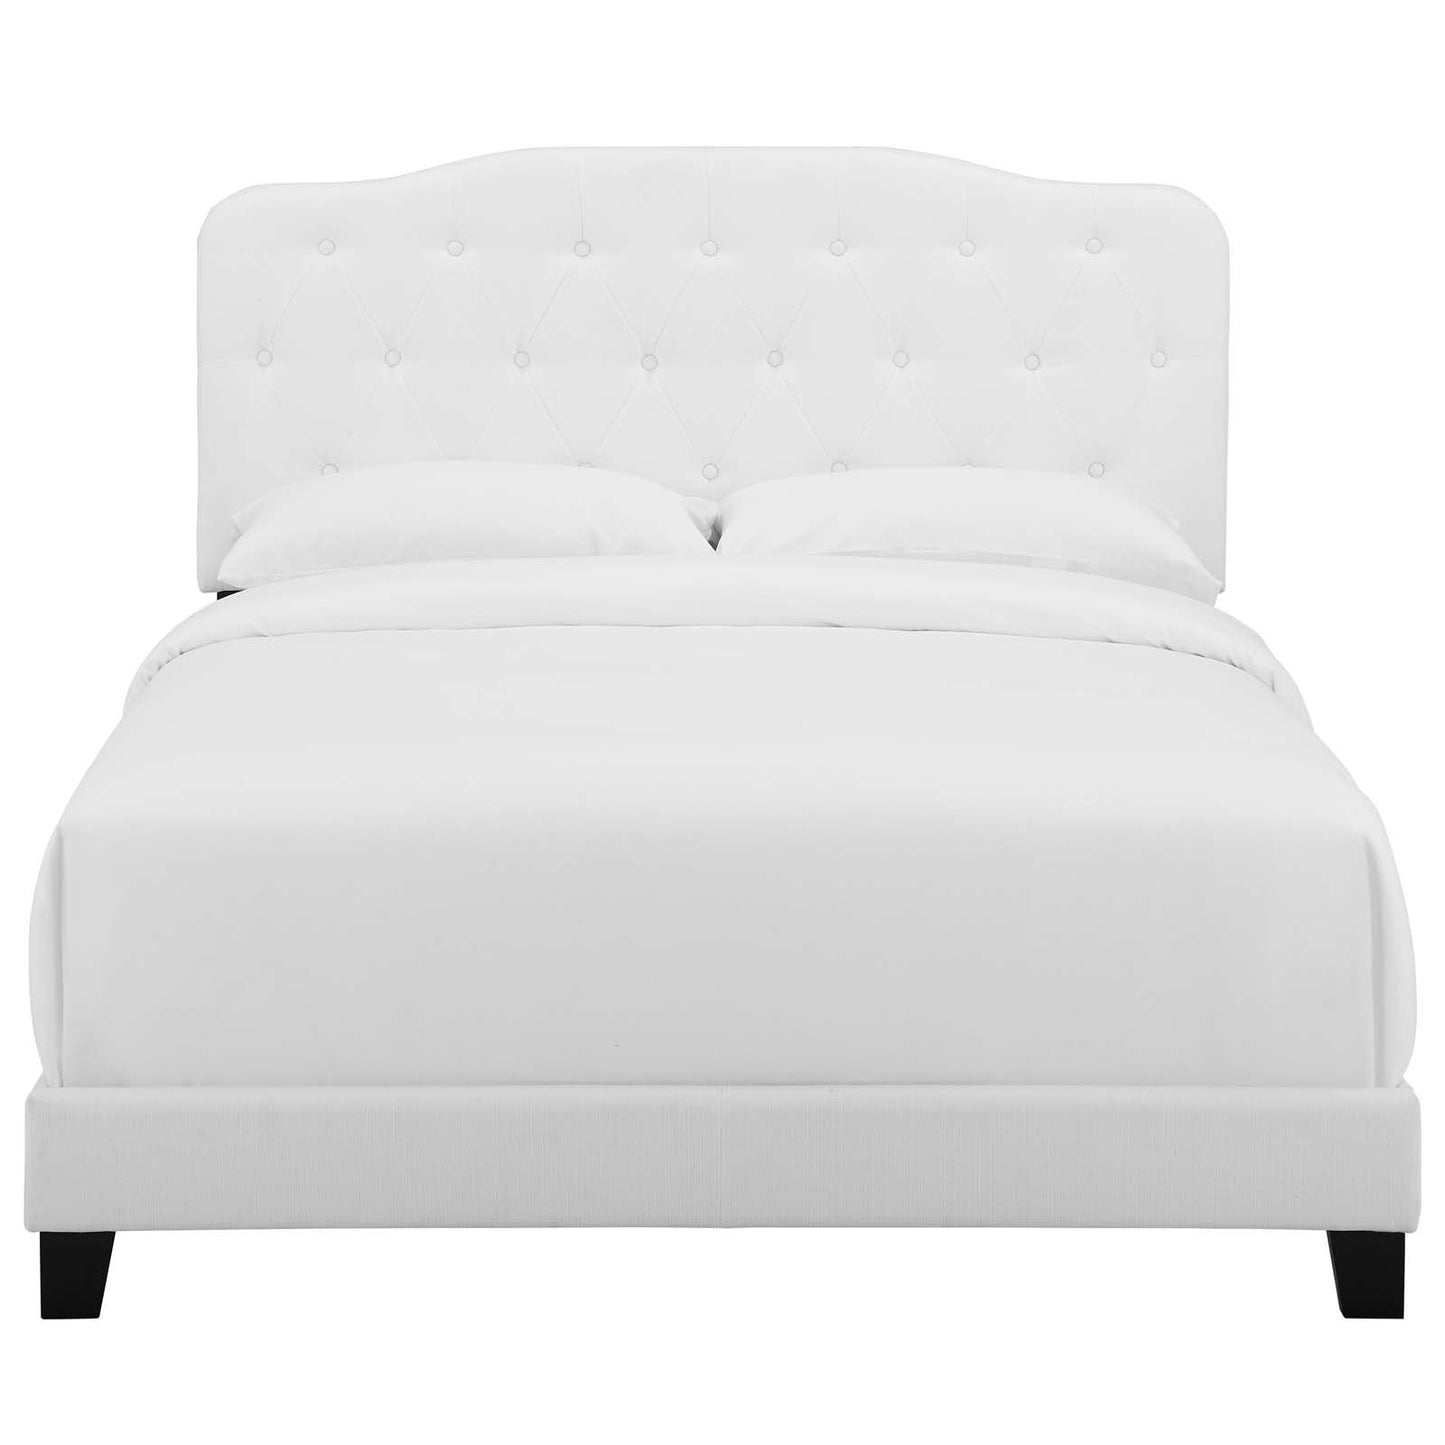 Amelia Twin Upholstered Fabric Bed White MOD-5838-WHI